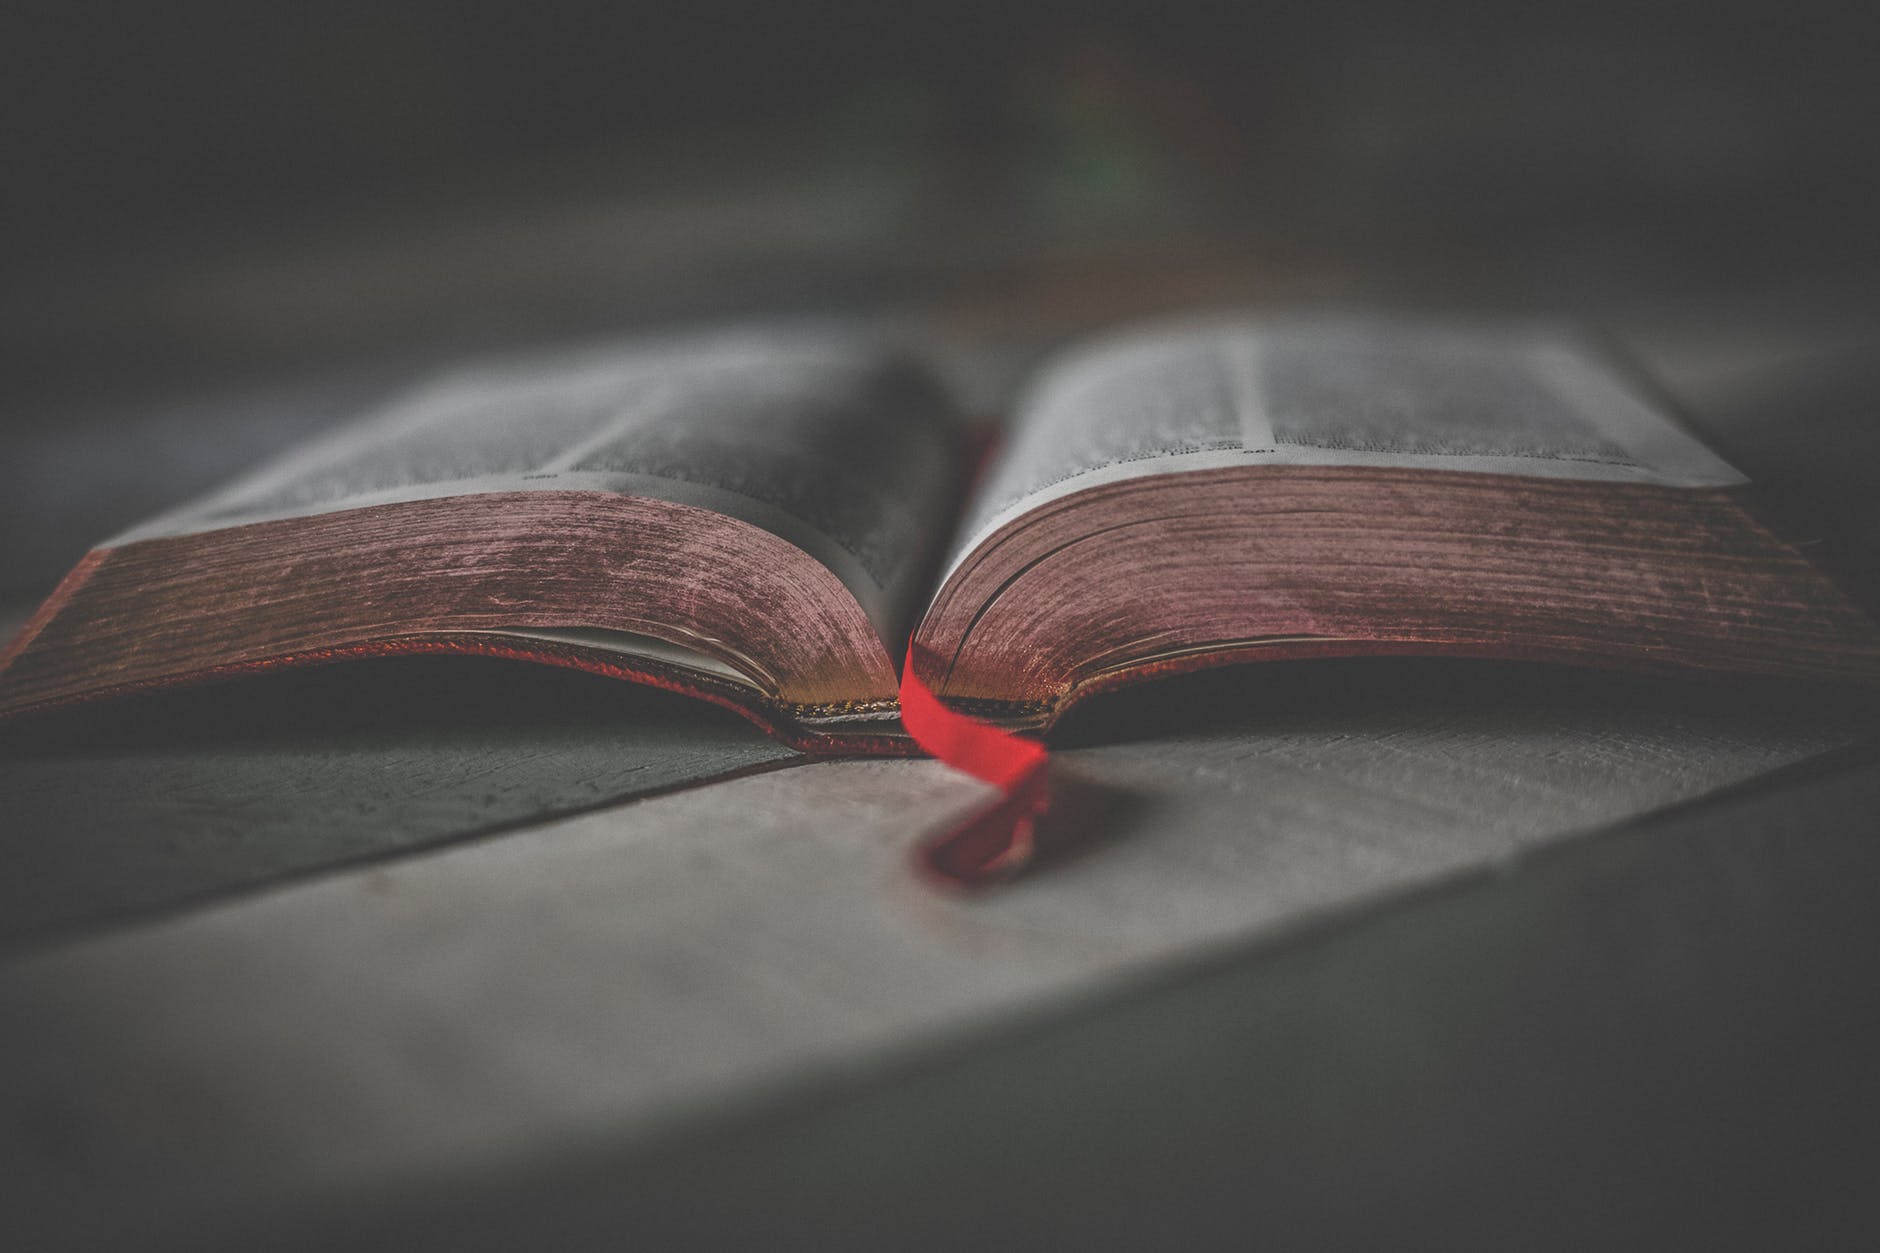 Top 20 Most Inspiring Bible Verses You Must Read Right Now